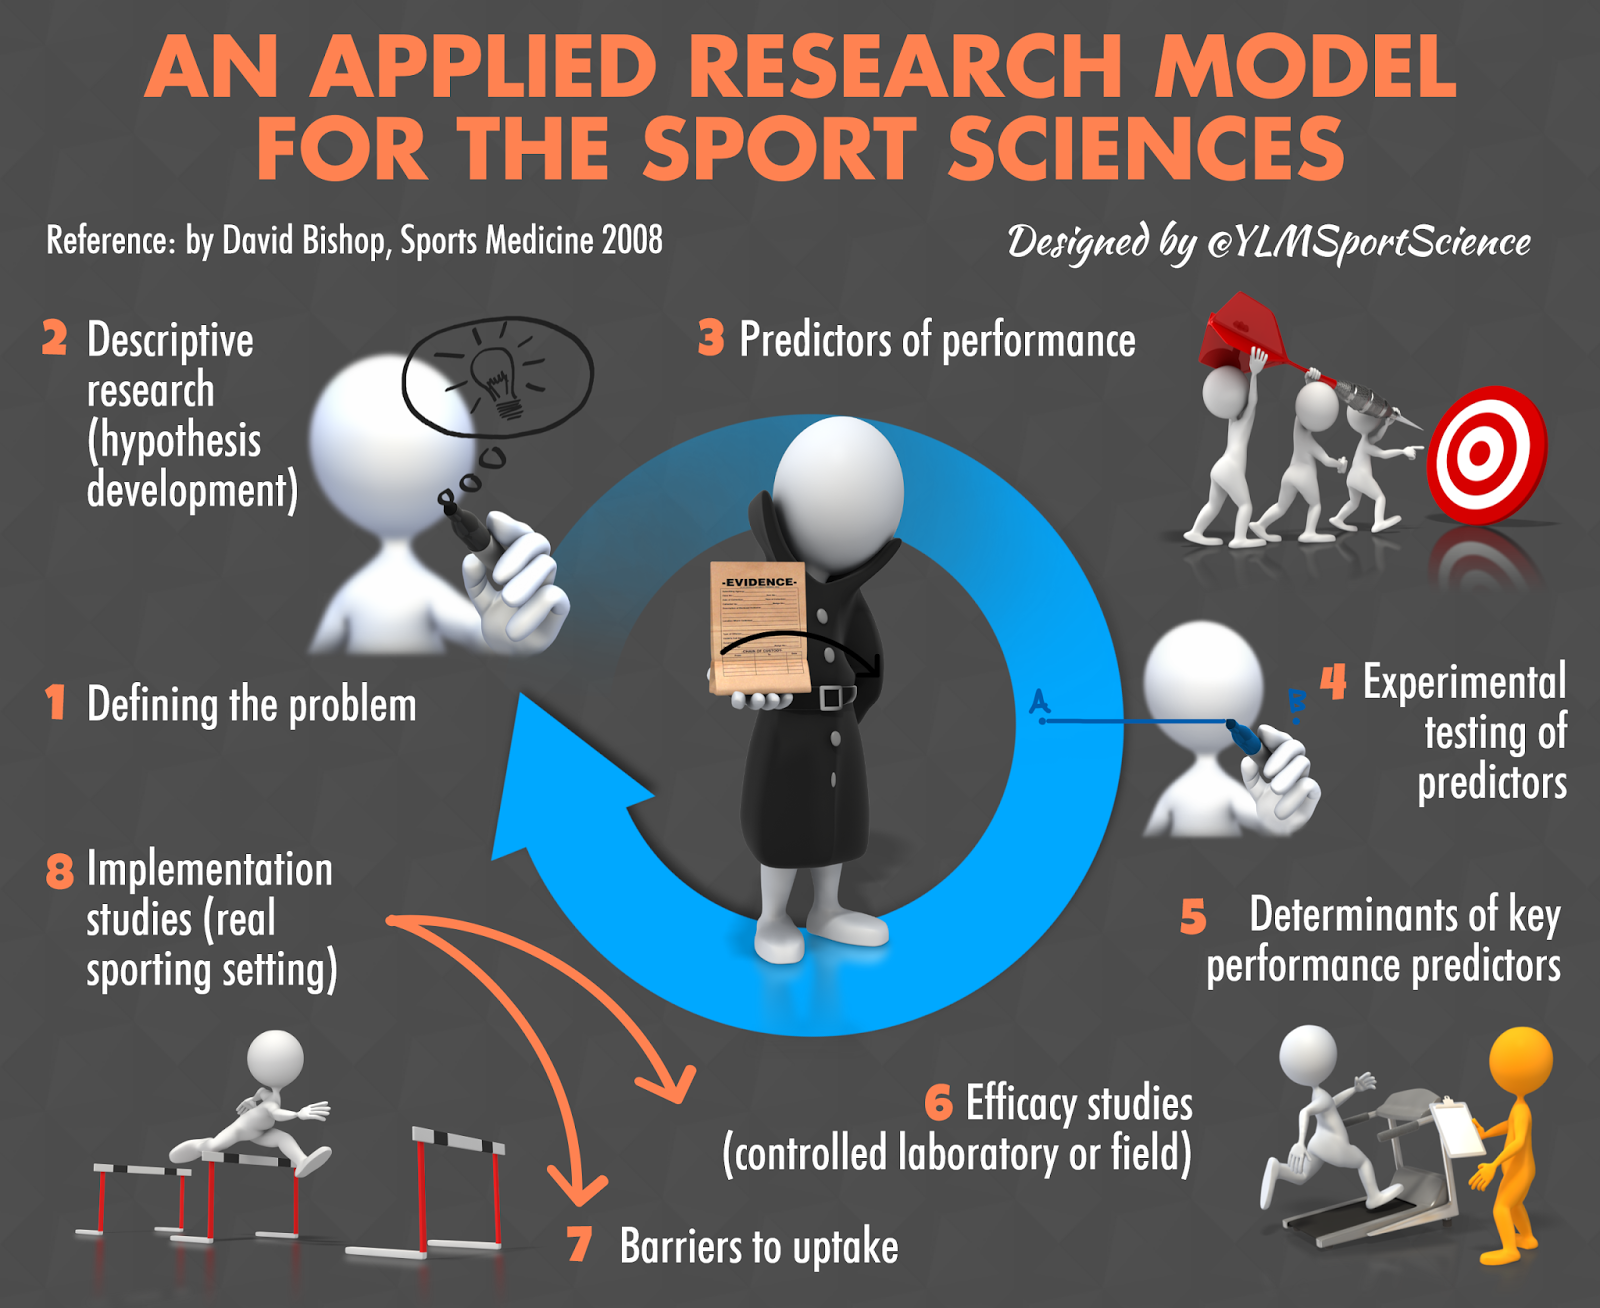 research projects in sport